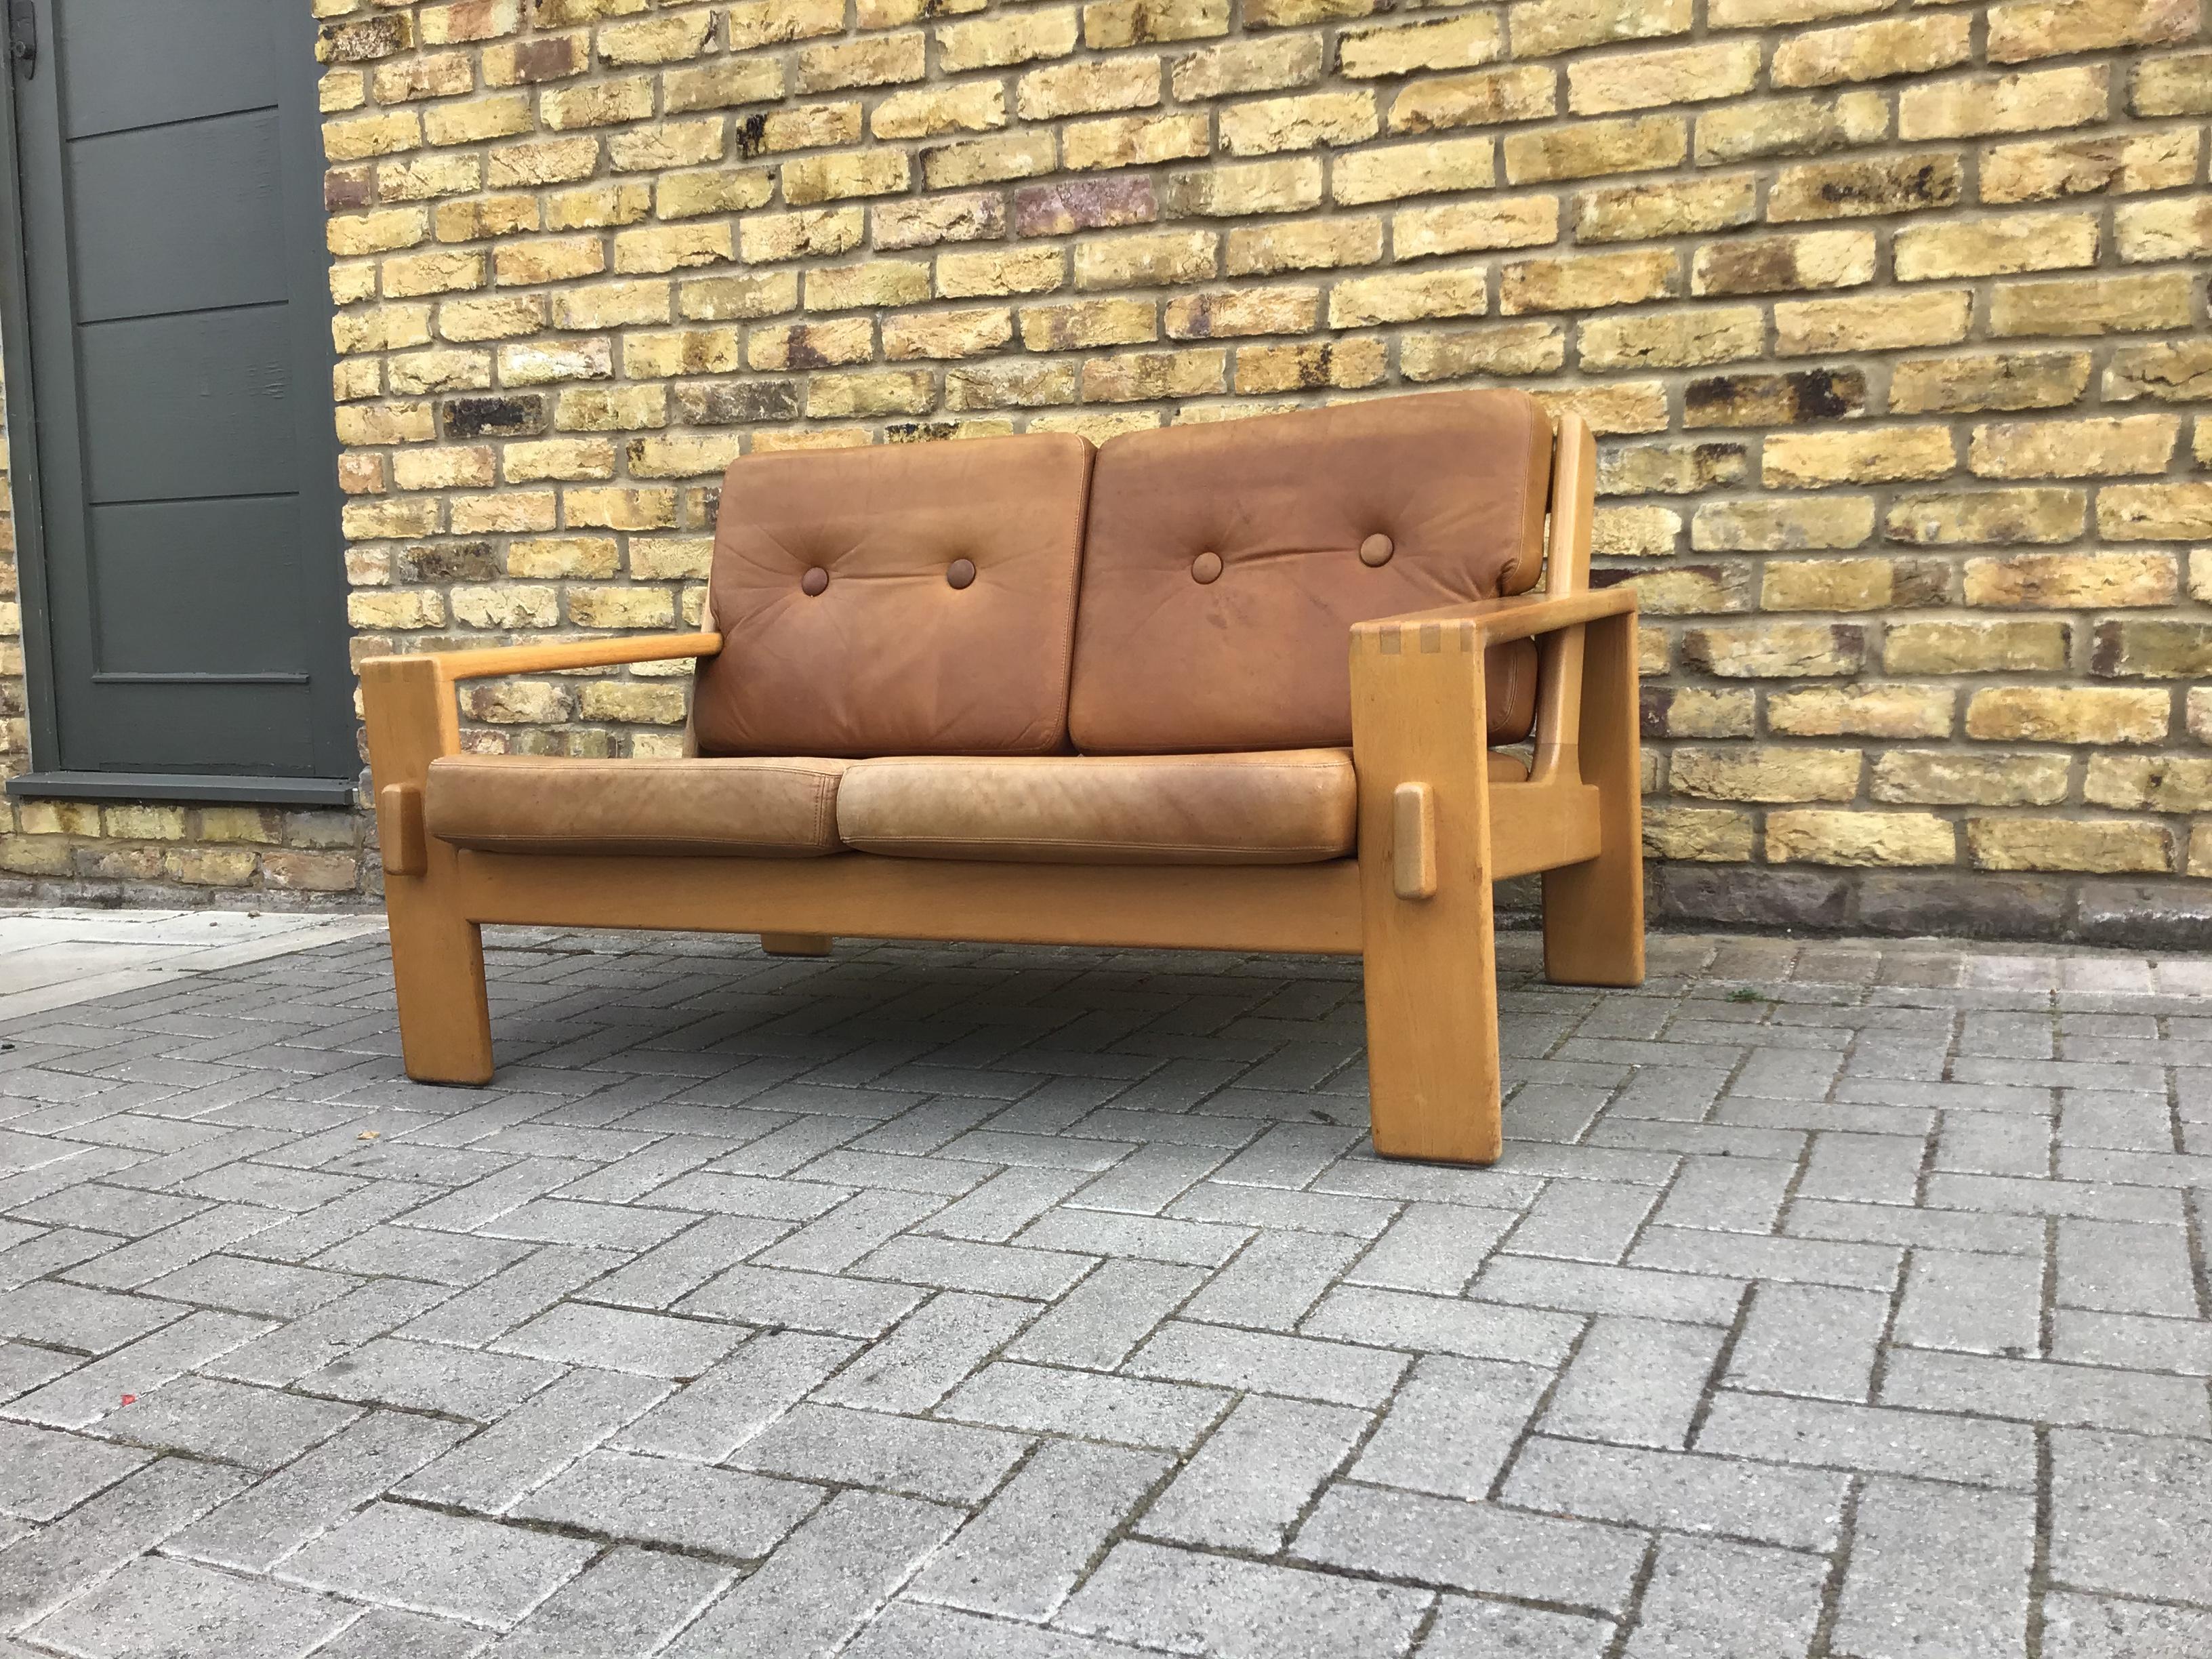 Two-seat sofa designed by Esko Pajamies for Asko Oak structure upholstered with original patinated soft brown leather .Remains in very good vintage conditions
circa 1960s Finland.